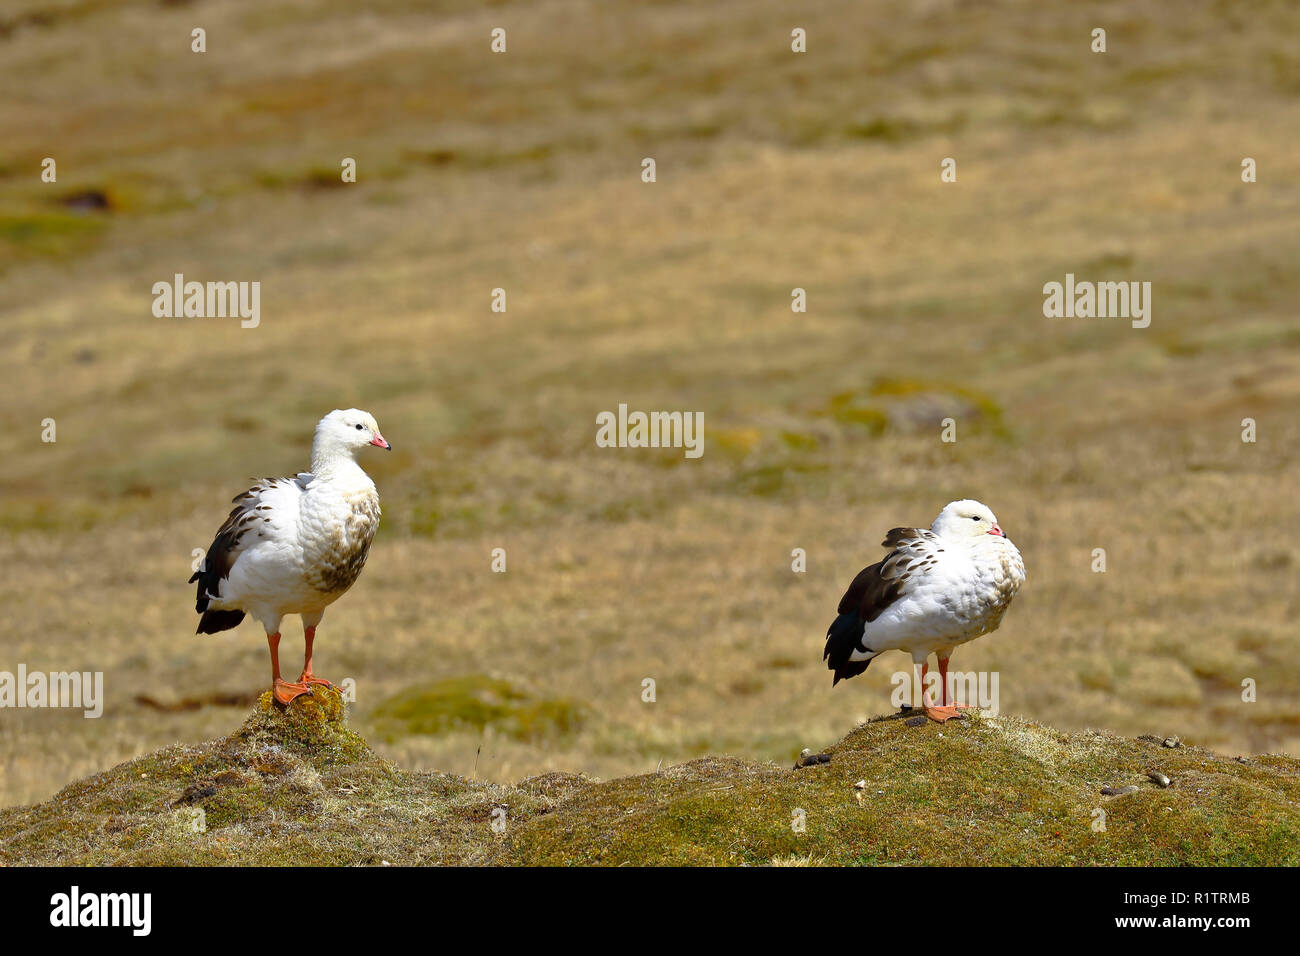 Pair of Andean goose (Chloephaga melanoptera) perched on the grassland in its natural environment in the puna. Stock Photo